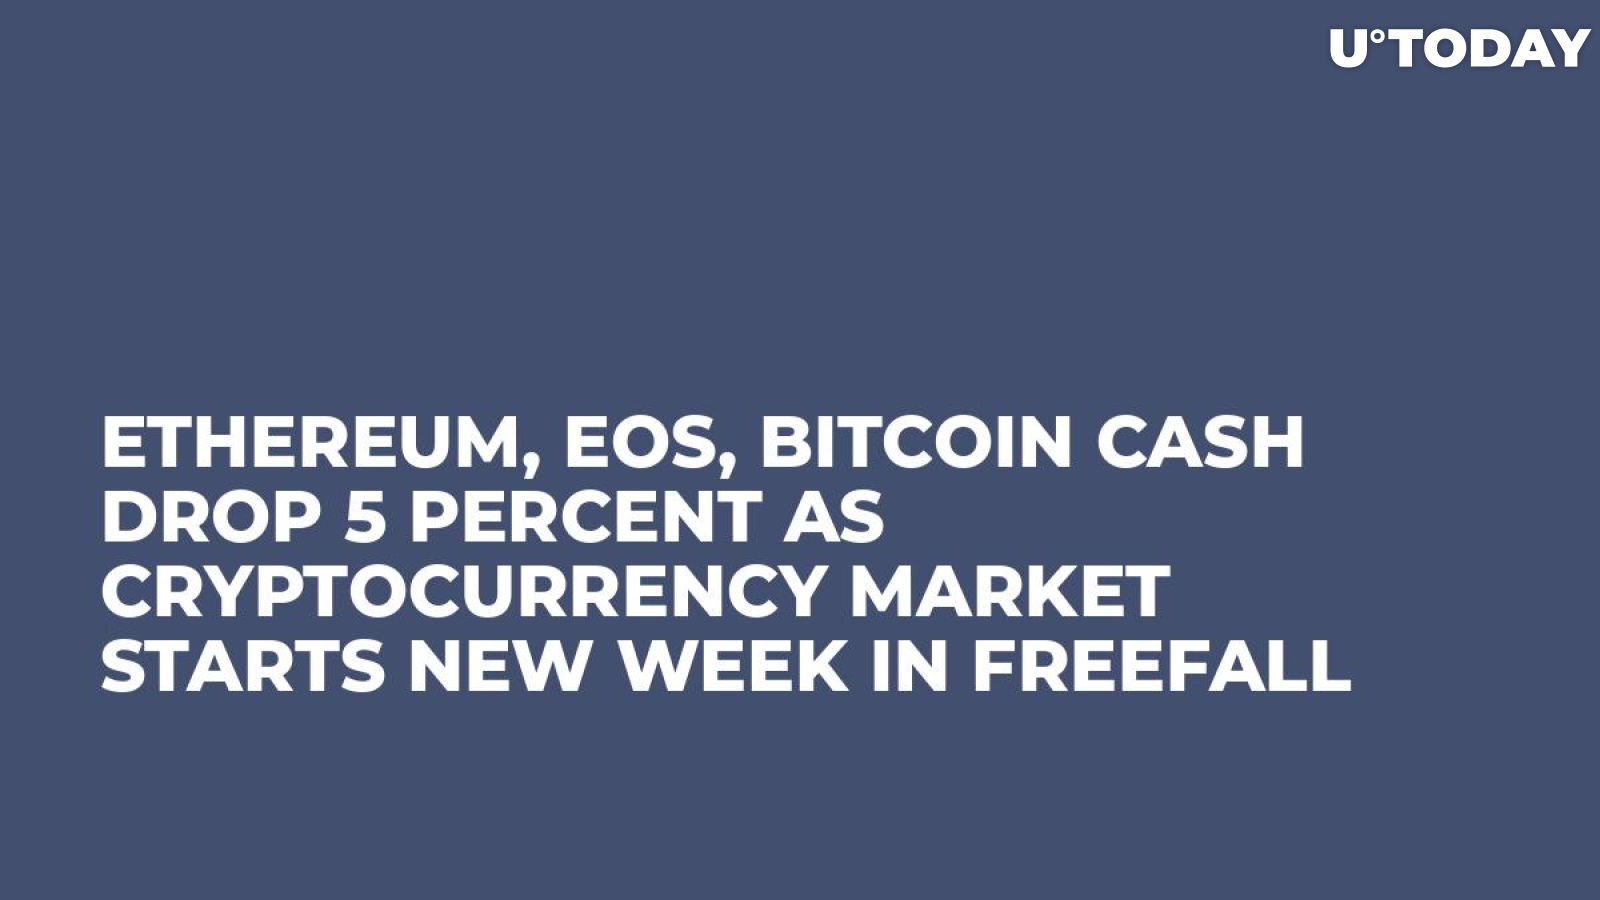 Ethereum, EOS, Bitcoin Cash Drop 5 Percent as Cryptocurrency Market Starts New Week in Freefall